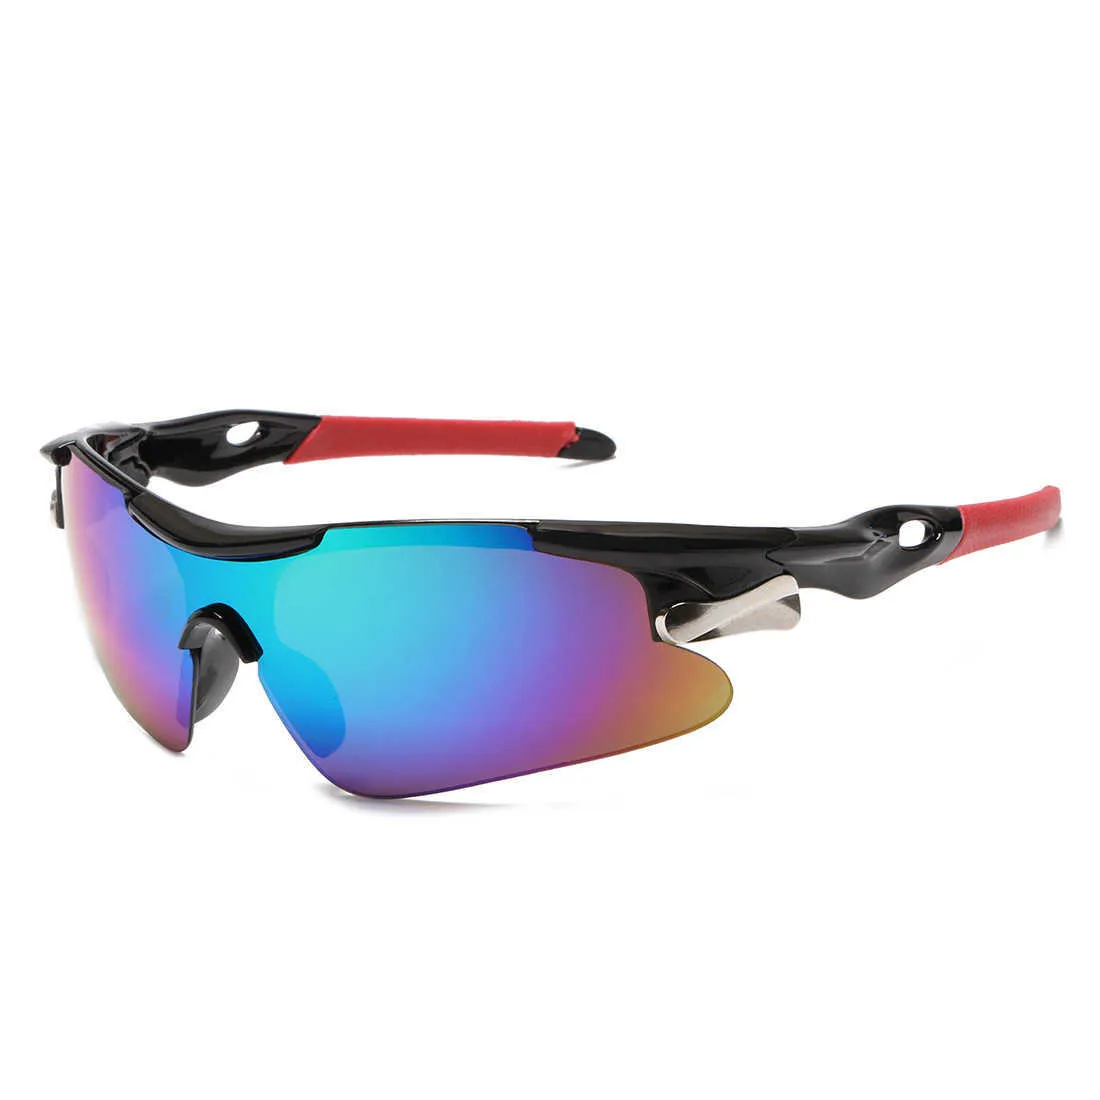 Cycling Sunglasses: Outdoor Sports Shades For Men And Women Windproof,  Designer Shades For Bicycle Riding From Dhgatezwz3, $14.41